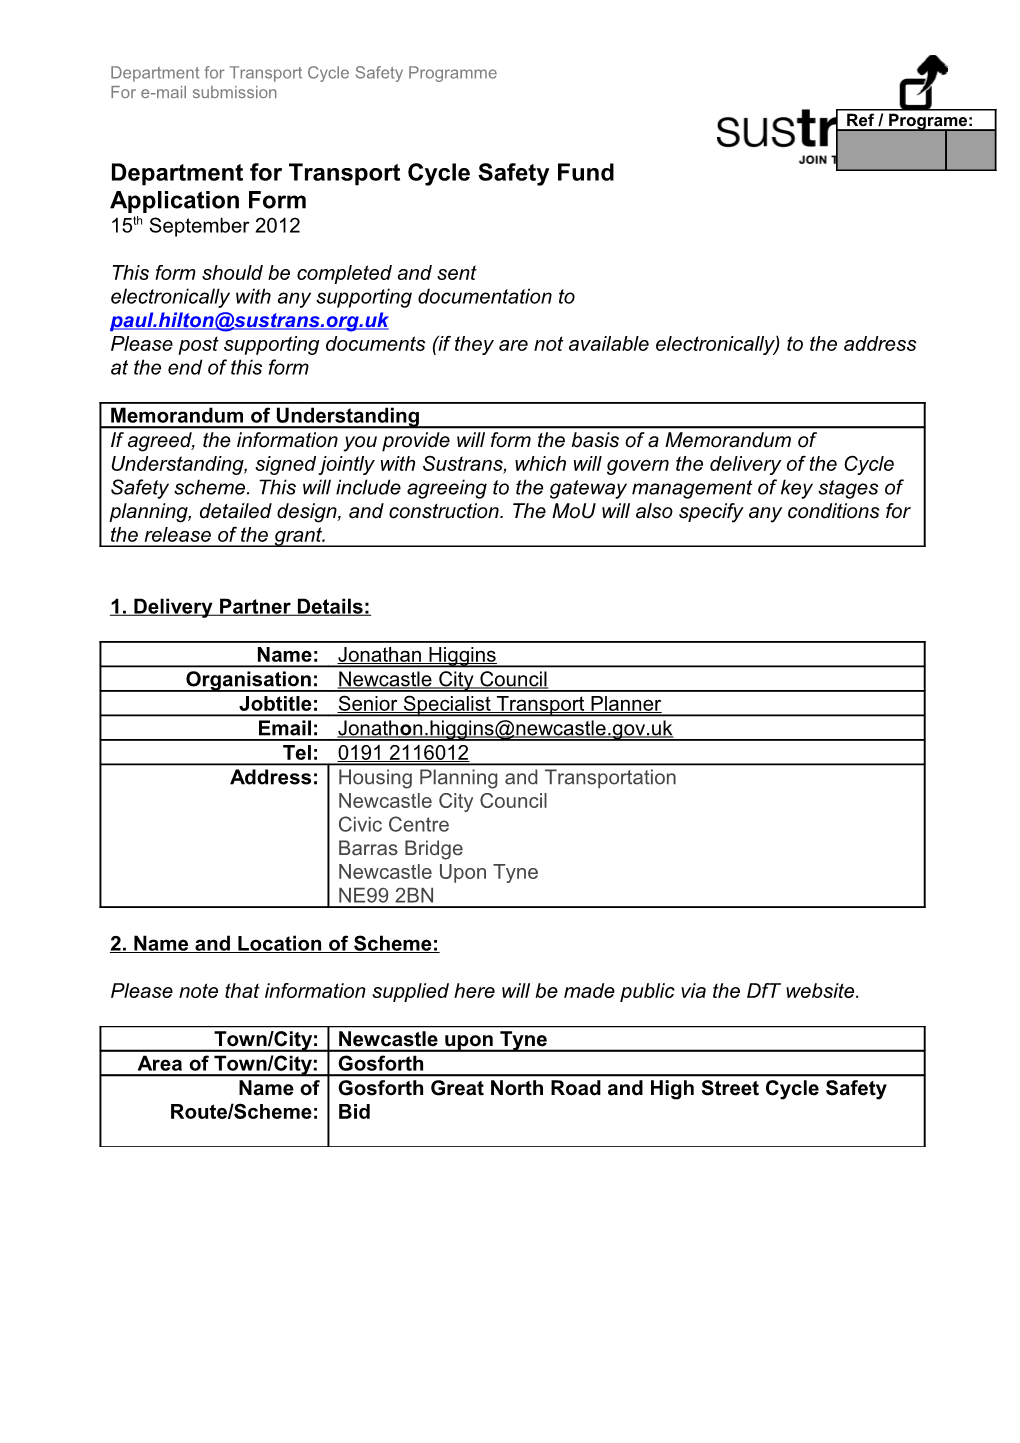 Application for Funding from Dft Grant to Sustrans